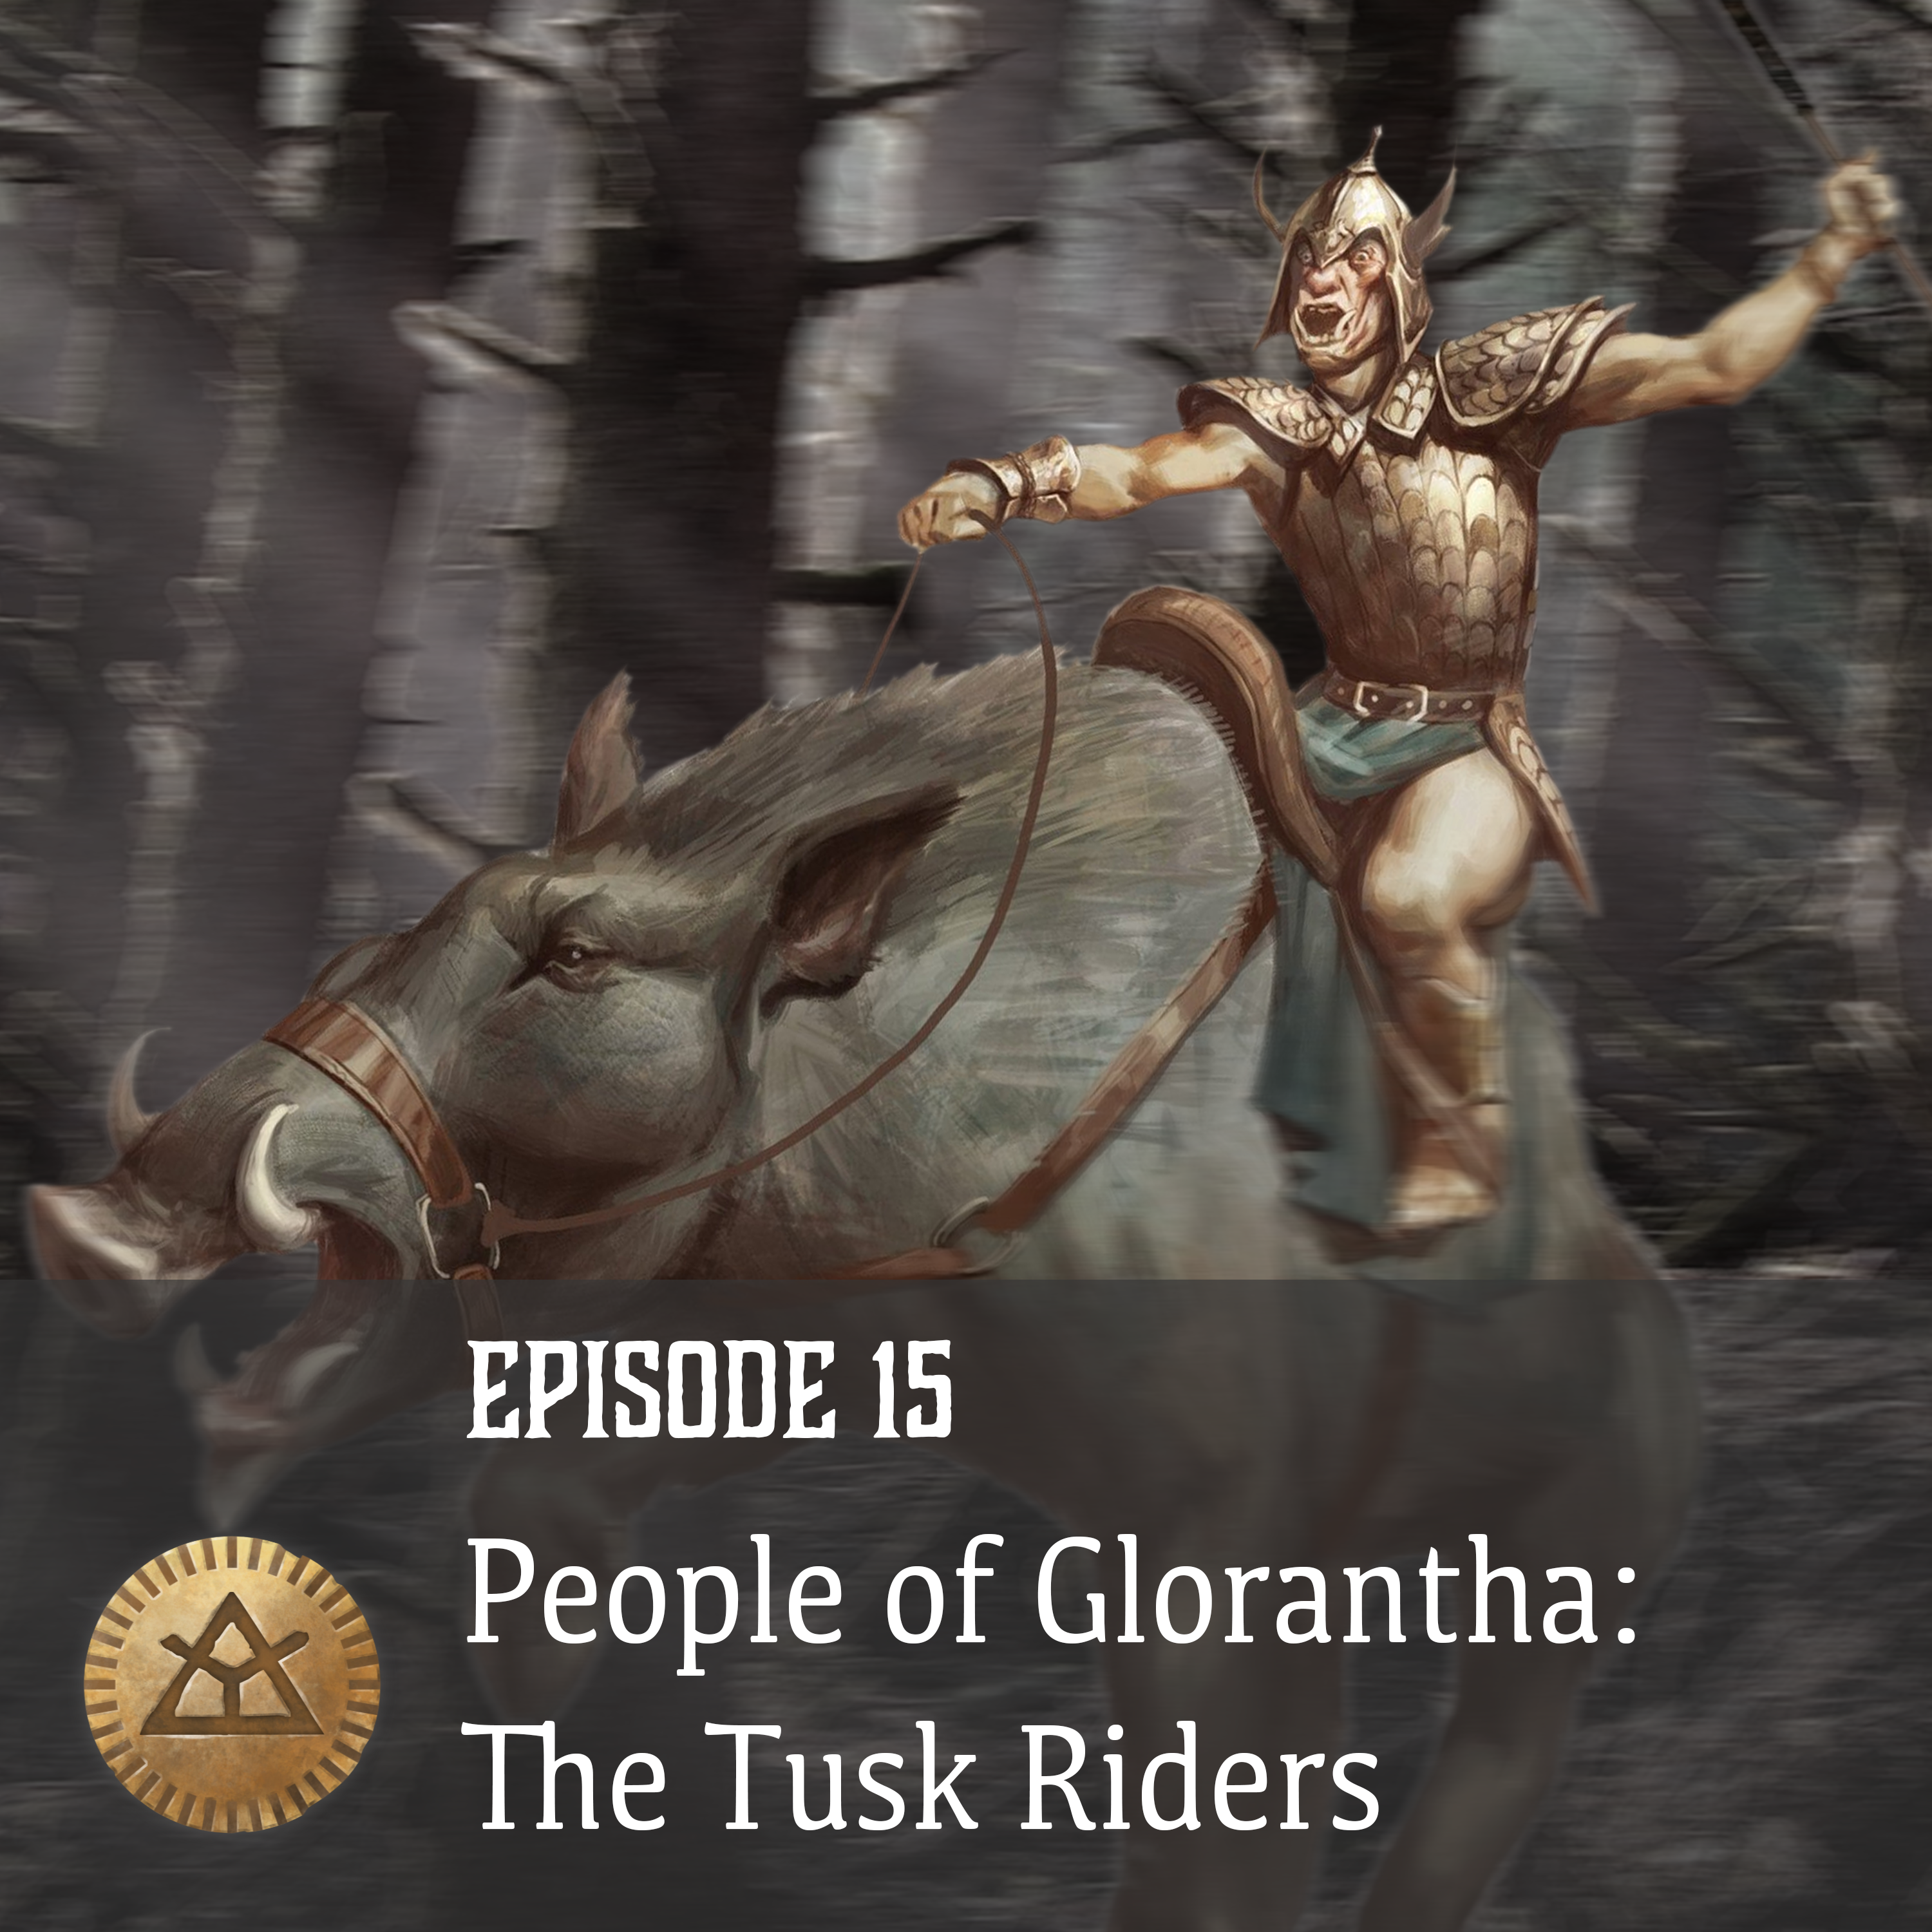 Episode 15: People of Glorantha: The Tusk Riders